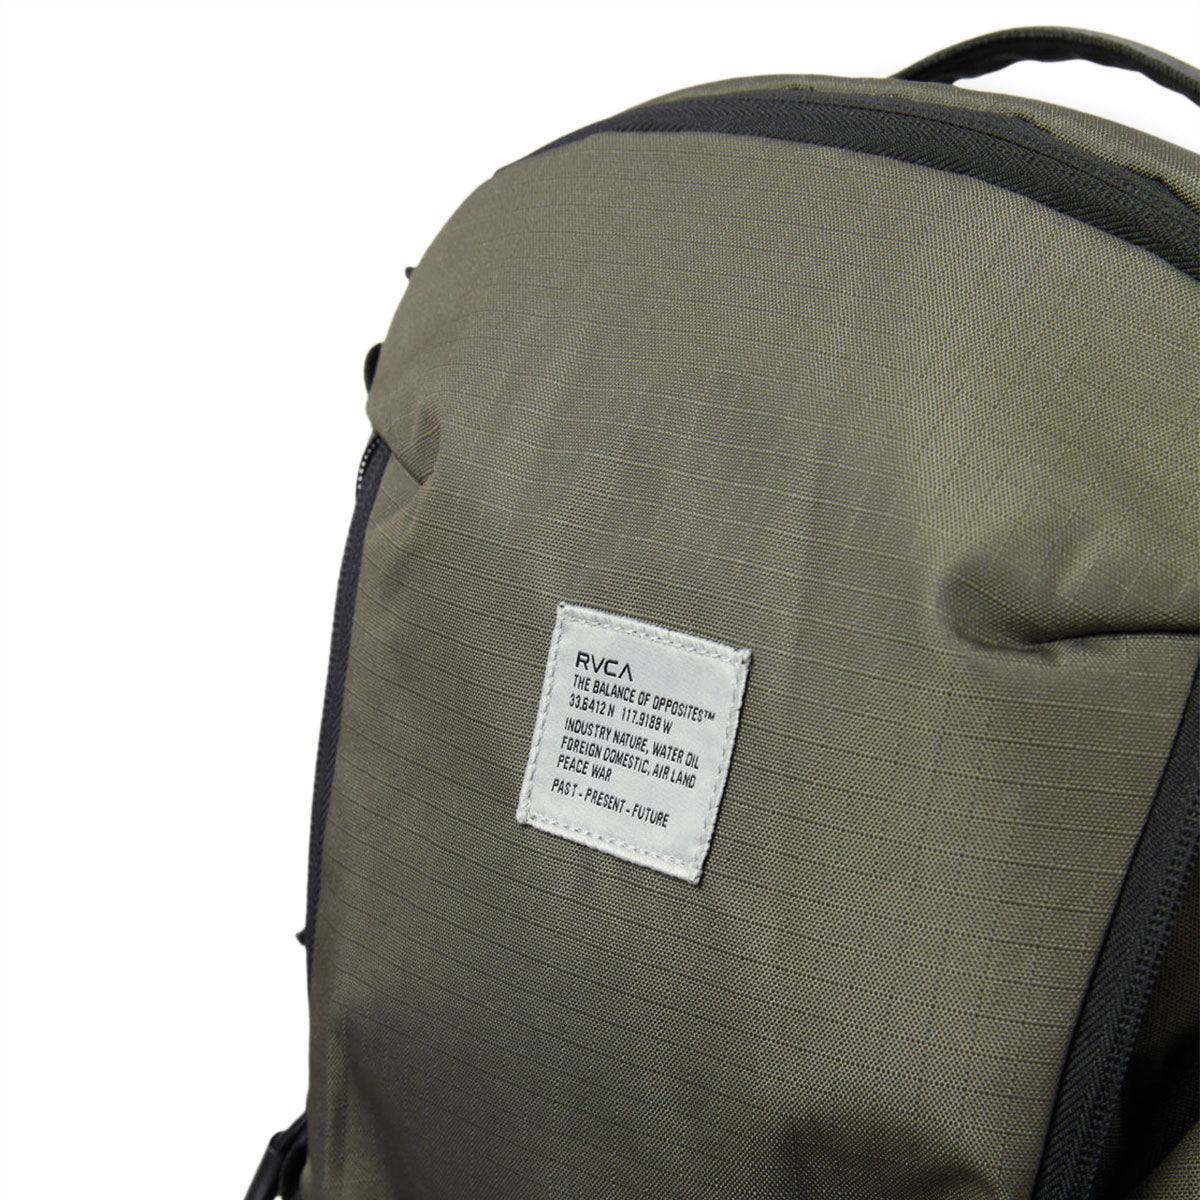 RVCA Rvca Daypack Backpack - Olive image 5